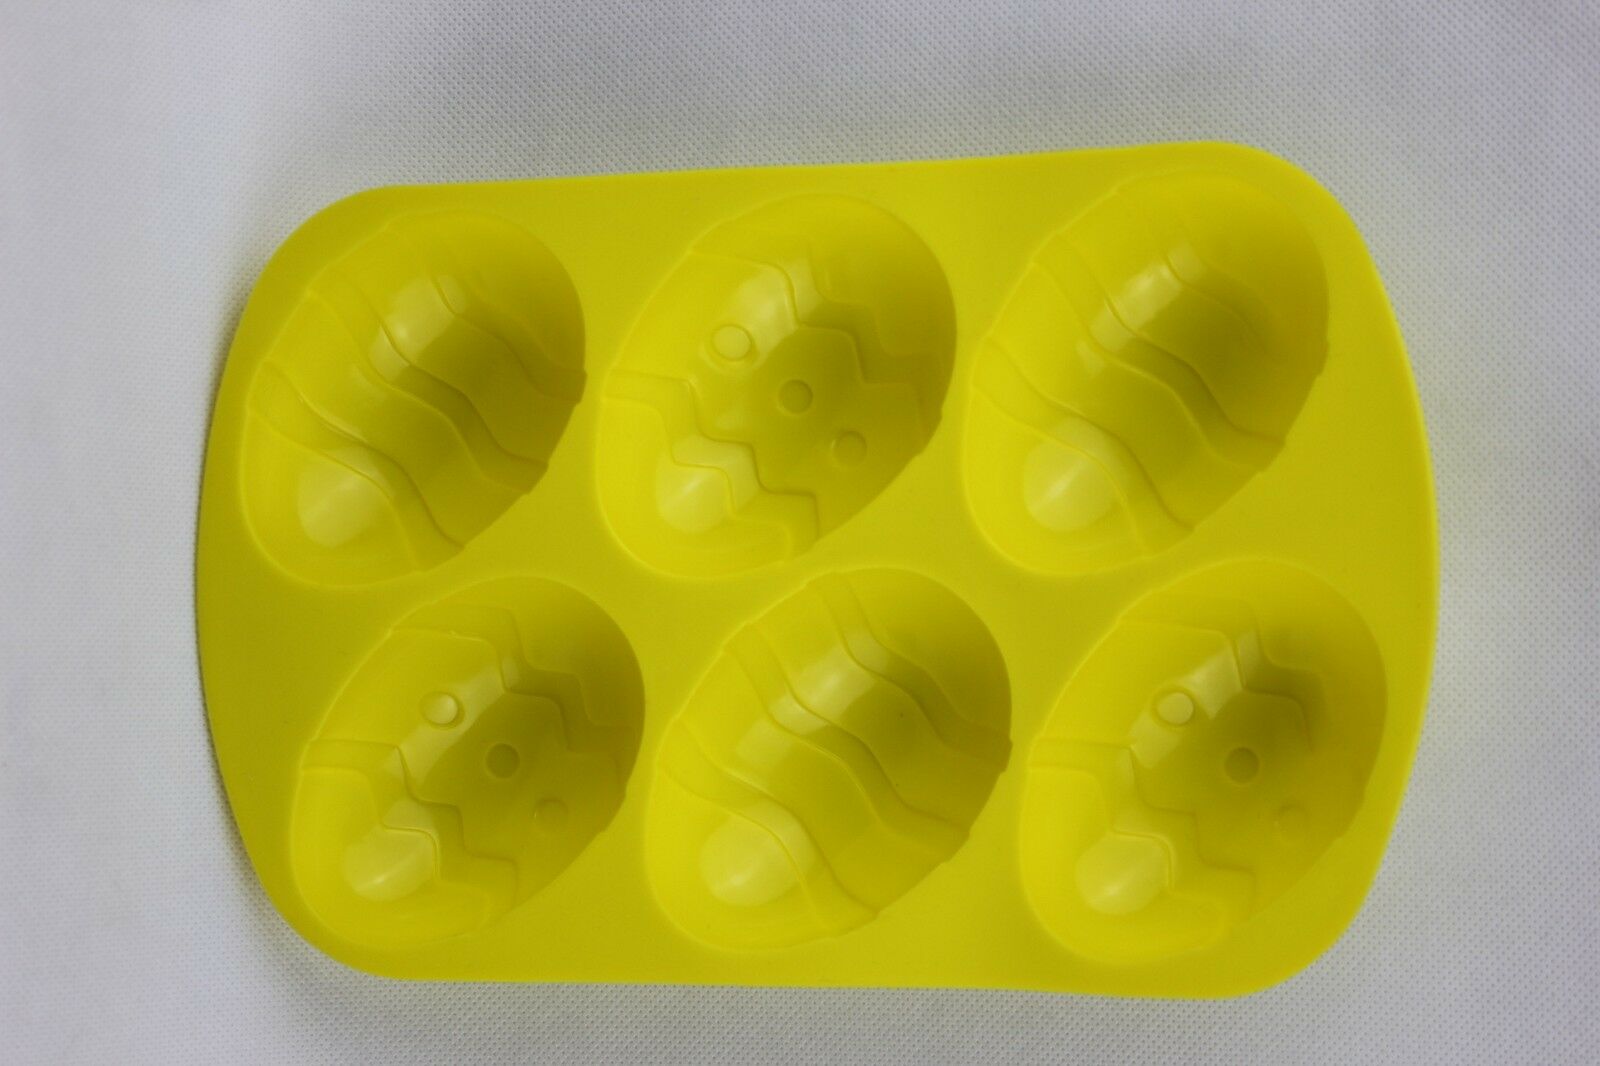 attachment-https://www.cupcakeaddicts.co.uk/wp-content/uploads/imported/2/Silicone-Easter-Egg-Mould-Make-your-own-Chocolate-Fondant-Decorating-Craft-L-323642309562-4.jpg